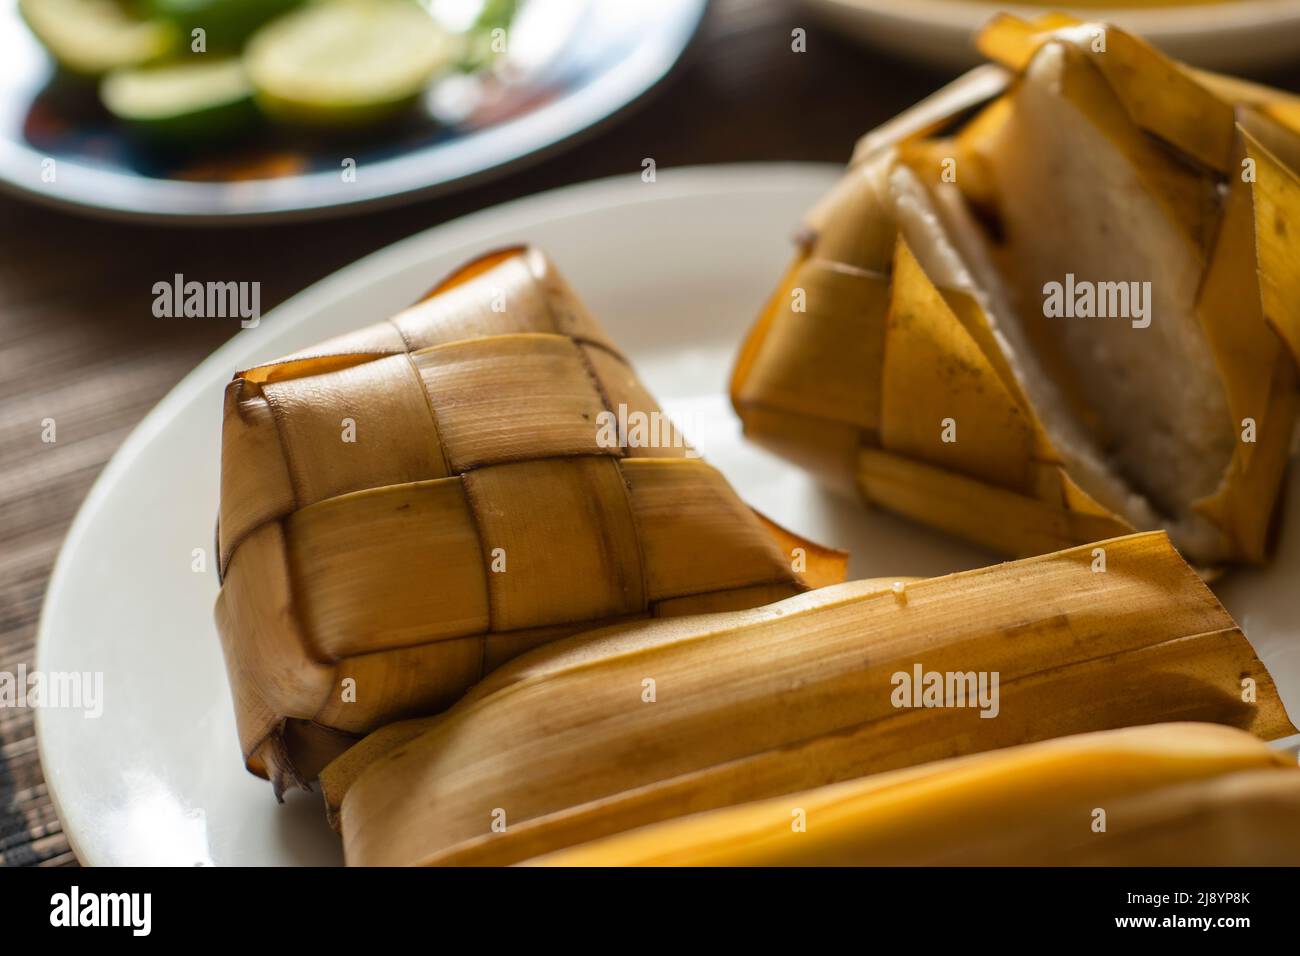 Rice cake (Ketupat) is Cooked Rice packed inside a diamond-shaped container of woven palm leaf pouch for Moslem Celebration. Eid Mubarak concept. Indo Stock Photo